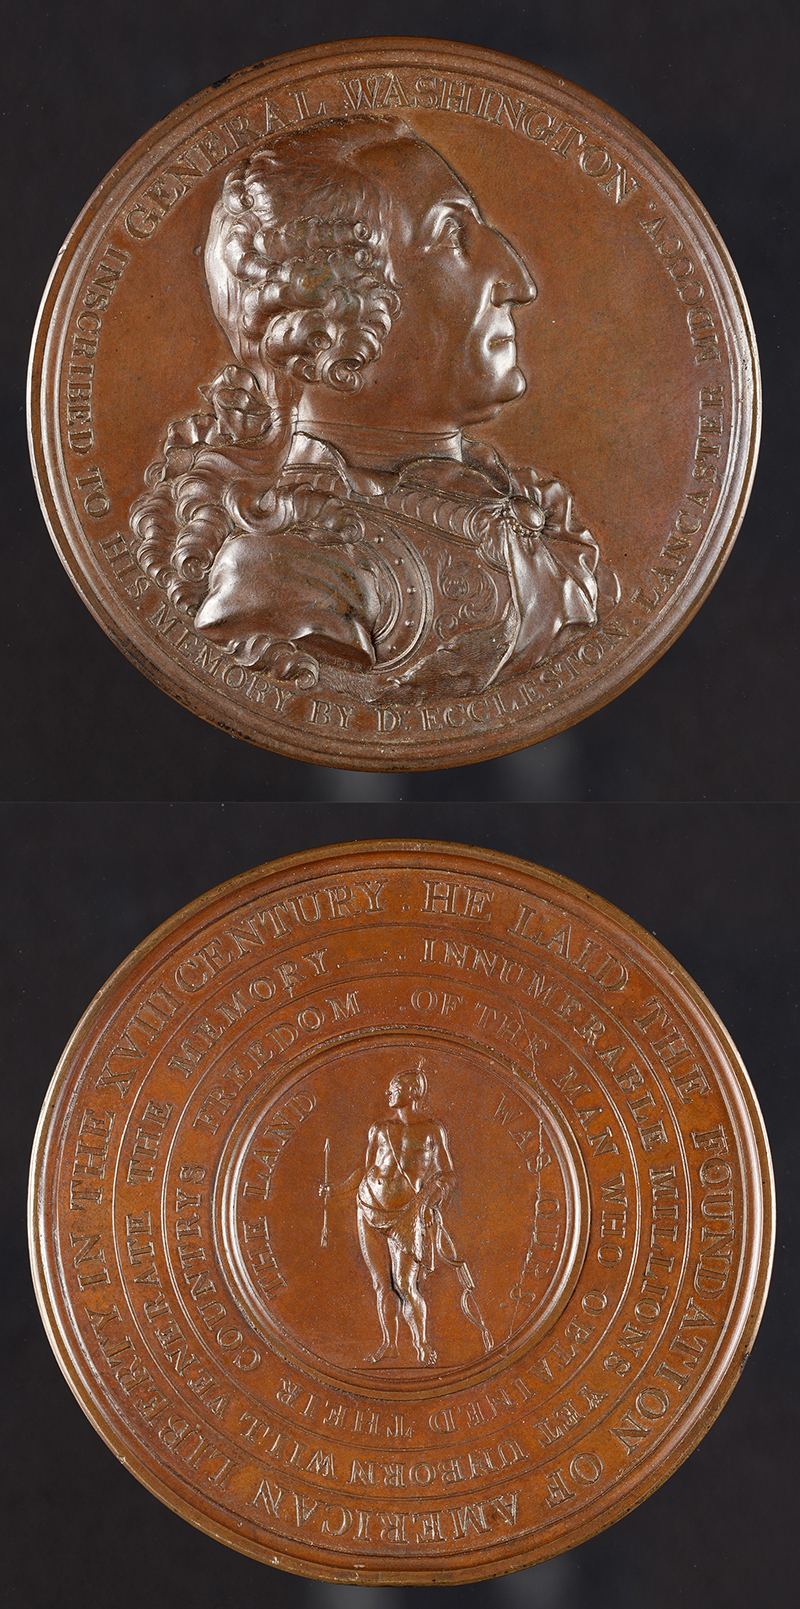 Two sides of a bronze medal, one side showing the profile of George Washington, the other shows a figure with an inscription surrounding him